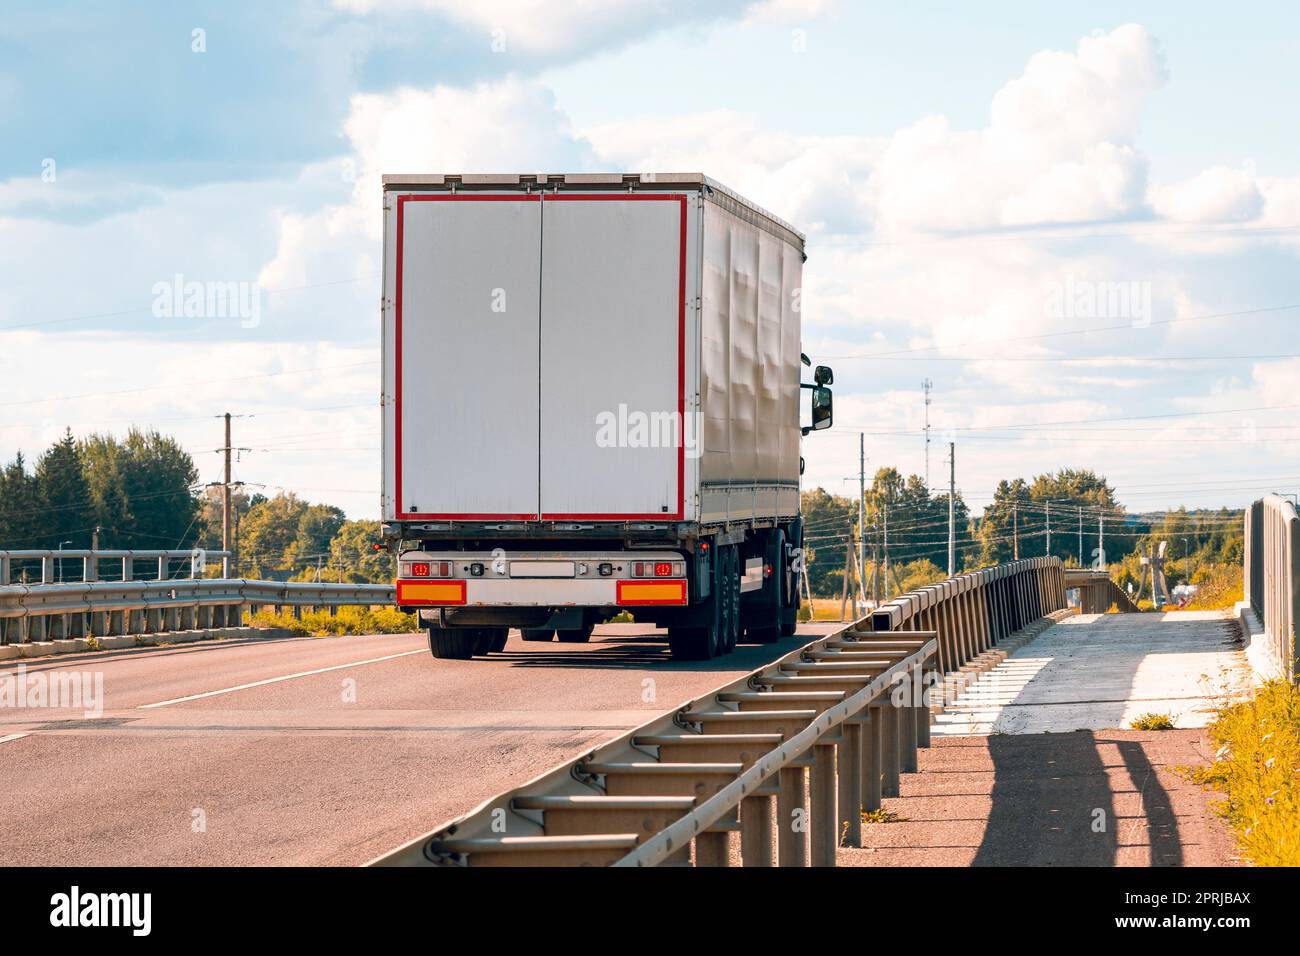 White truck on asphalt road ground with metal safety barrier Stock Photo